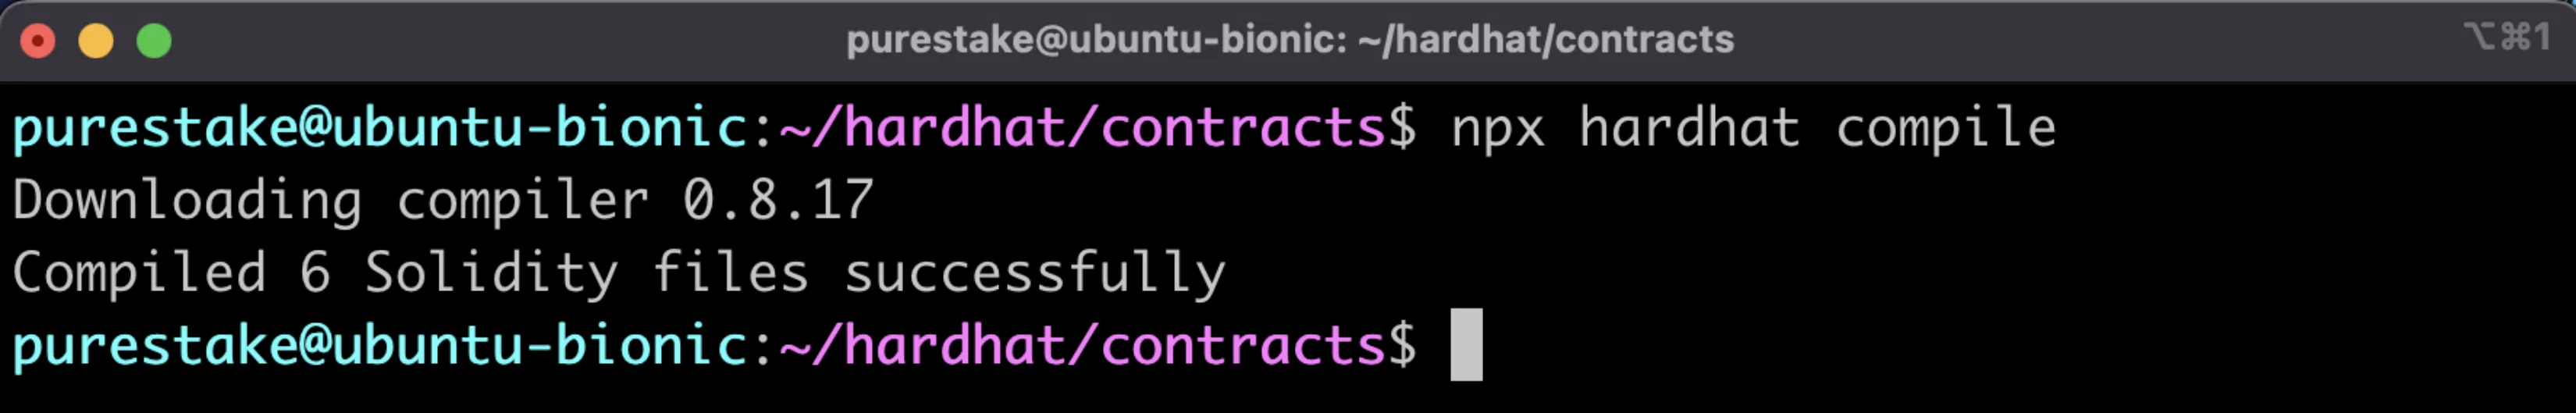 Compile contracts